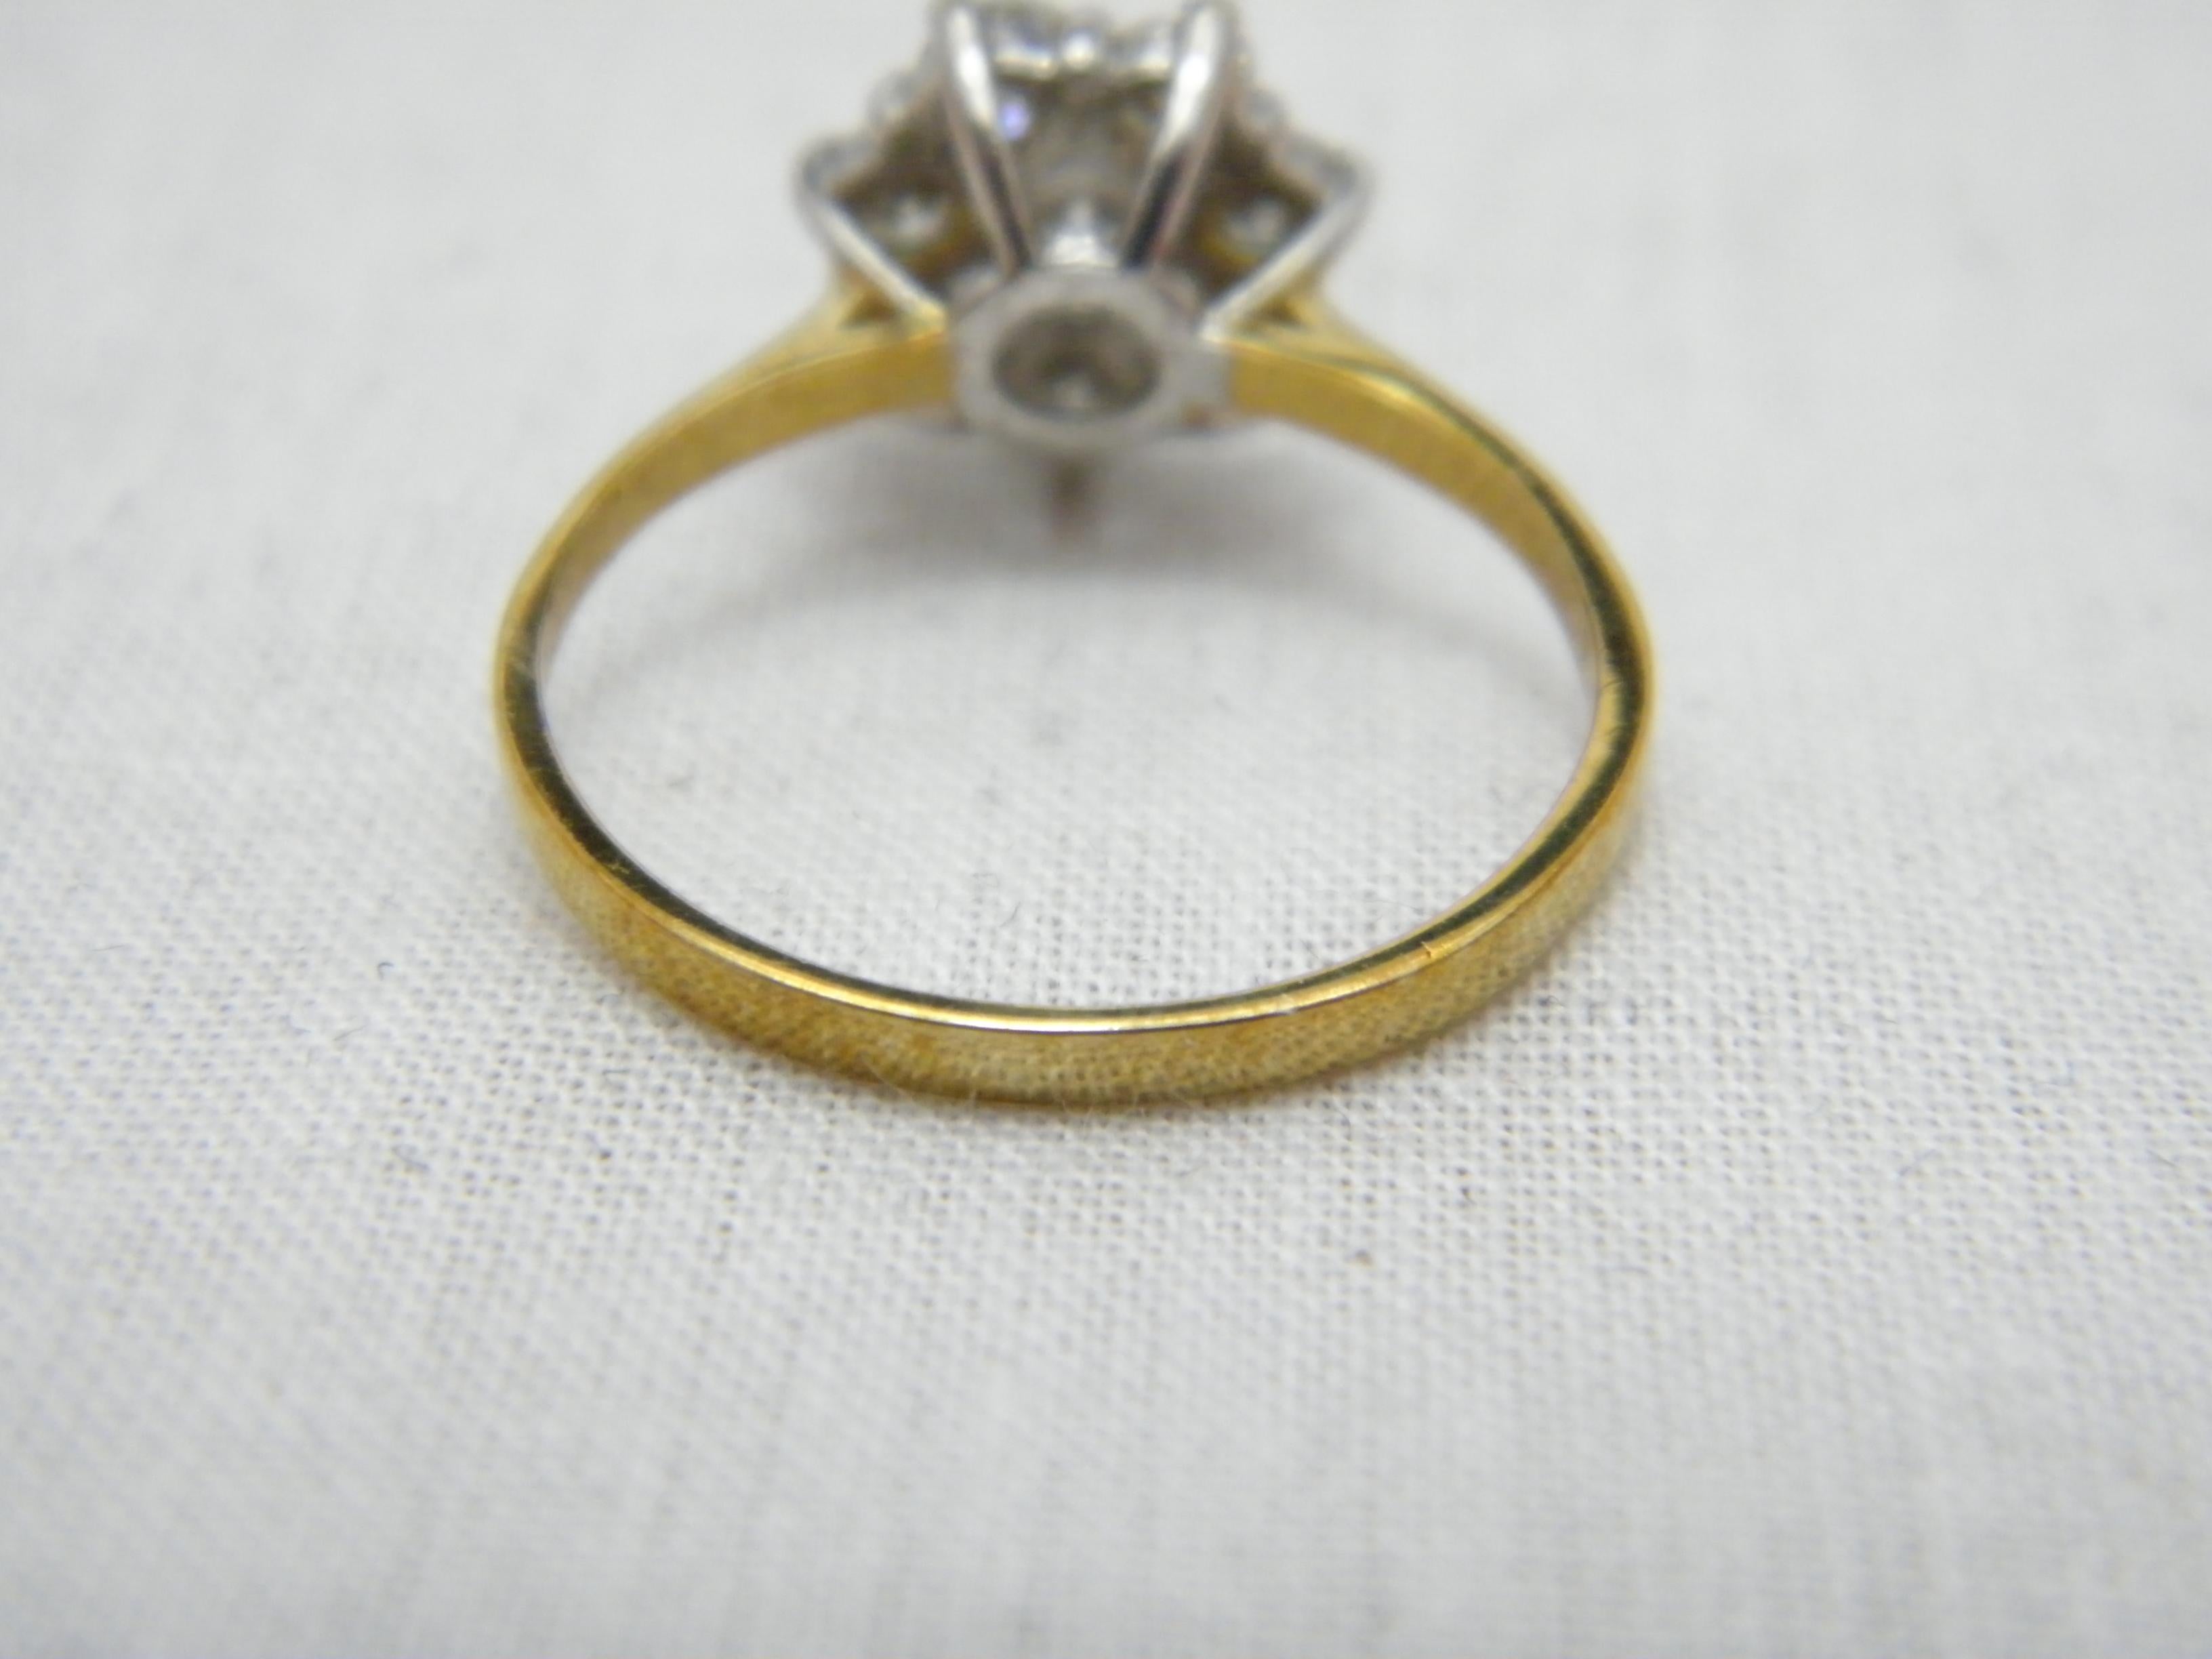 Vintage 9ct Gold 1.0Cttw Diamond Daisy Cluster Engagement Ring 375 Size P 7.75 In Excellent Condition For Sale In Camelford, GB